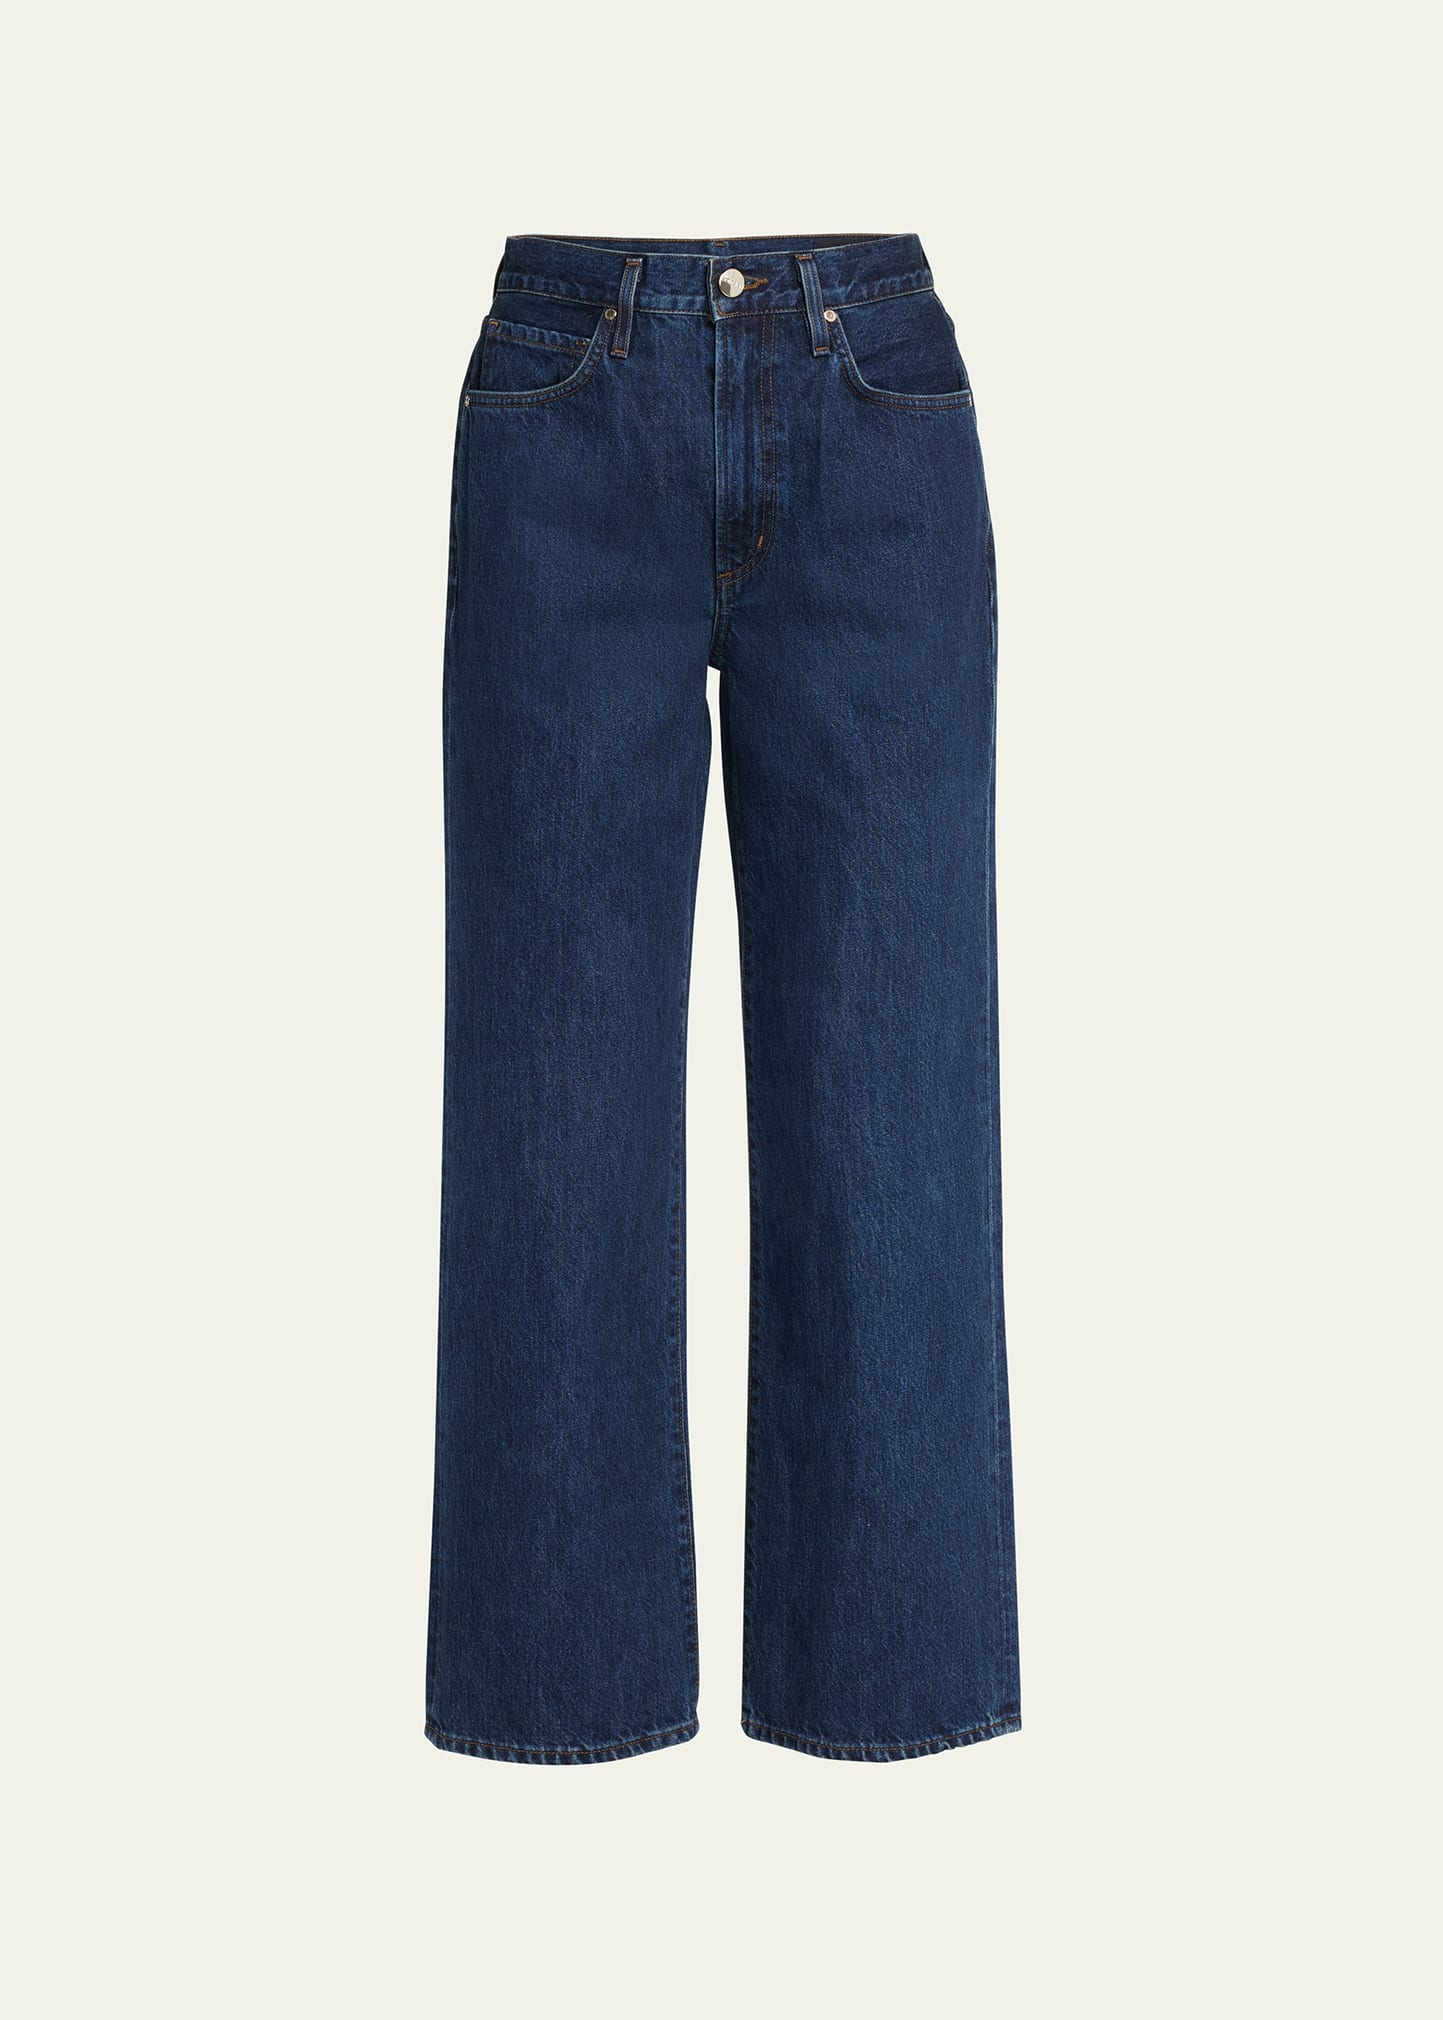 GOLDSIGN THE BARKER RELAXED STRAIGHT JEANS